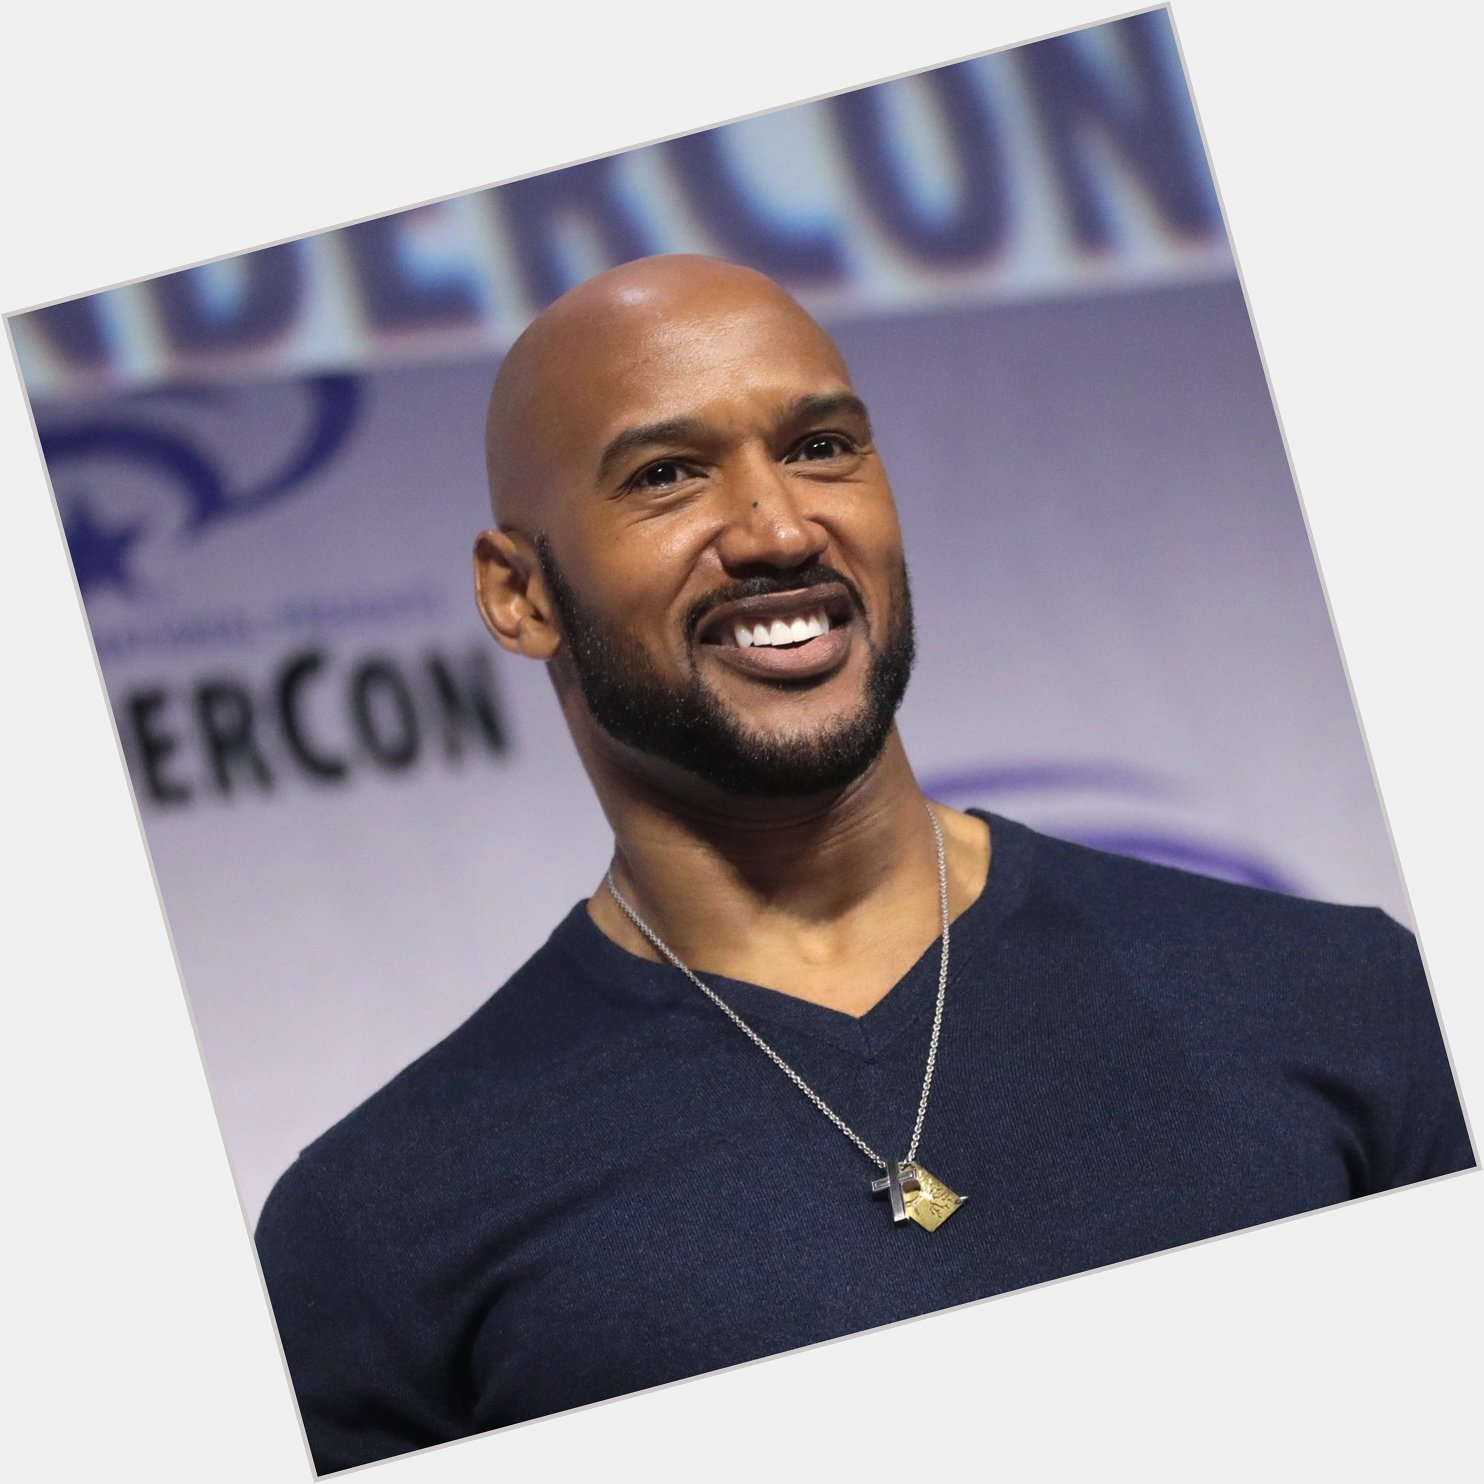 HAPPY BIRTHDAY HENRY SIMMONS            OUR KINGGG 